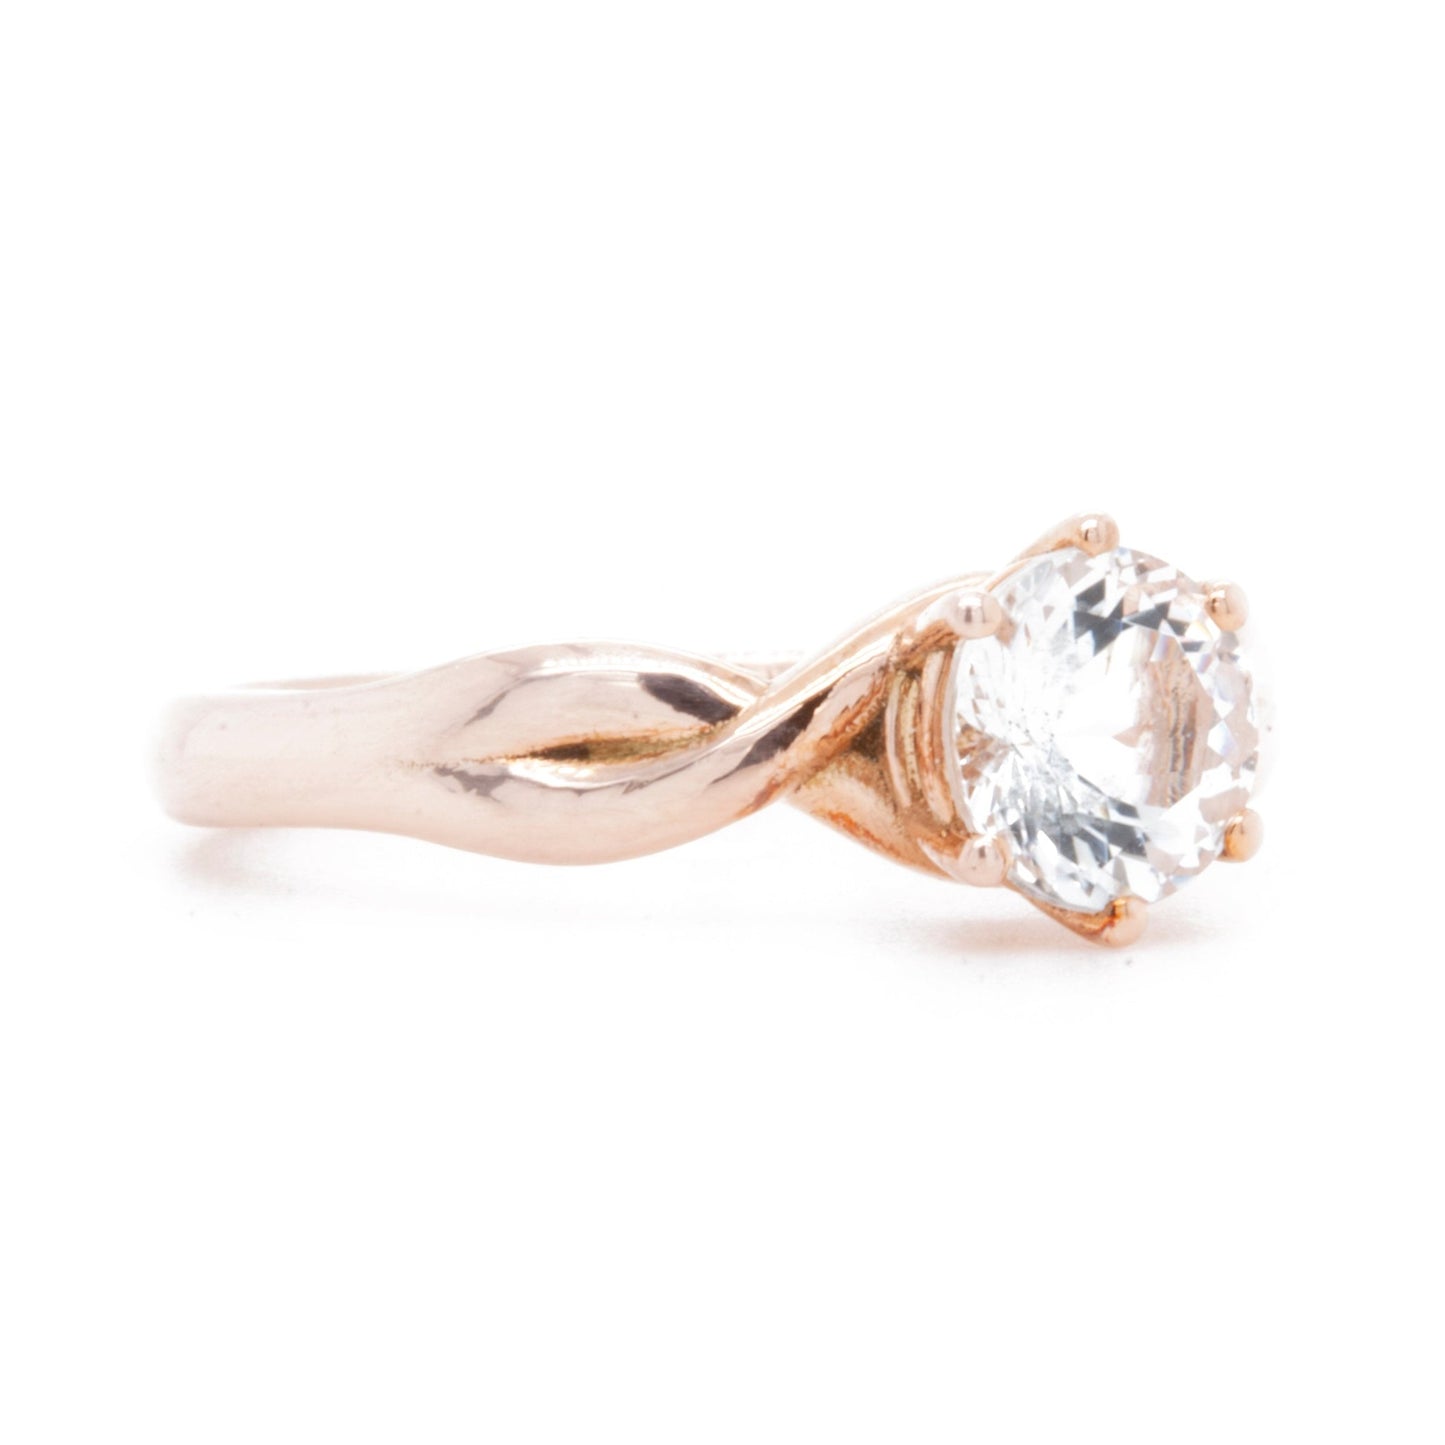 The Fairmined Rose Gold Goshenite Twist Ring (Ready to ship in size 6.25) - W.R. Metalarts